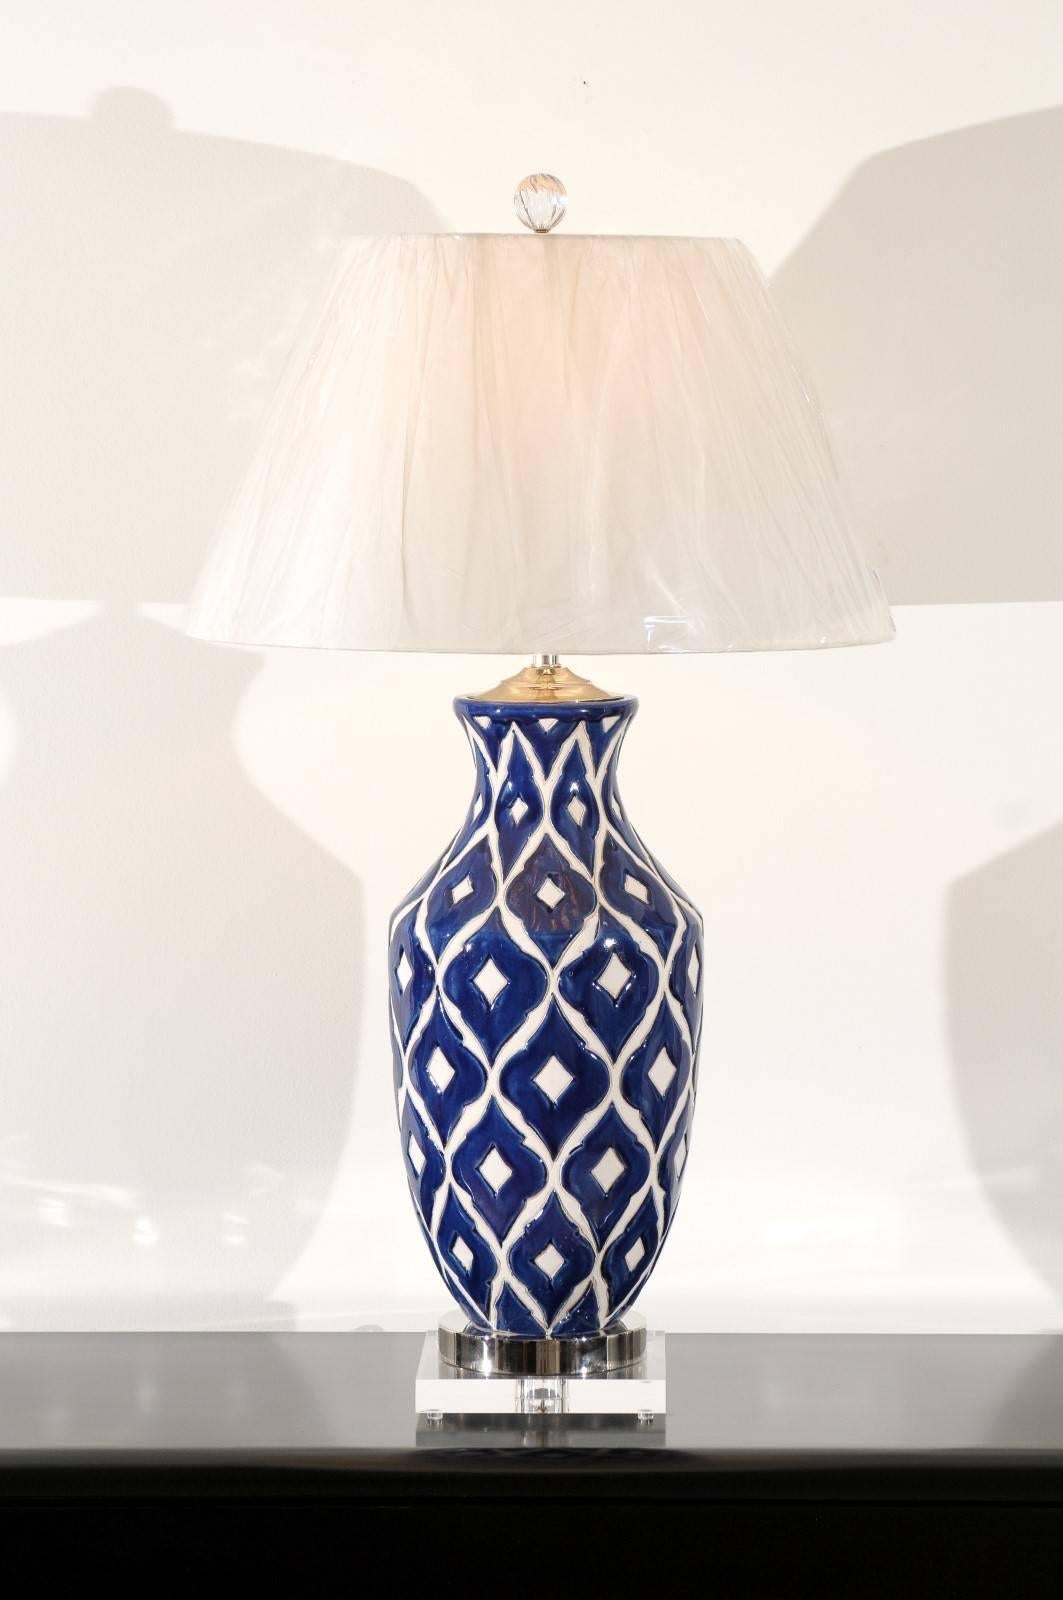 Striking pair of large-scale ceramic lamps with accents of nickel and Lucite A beautiful pair of large-scale ceramic vessels as custom lamps. Fabulous form with graphic motifs. Exquisite jewelry! Excellent restored condition. Wired using clear cord: